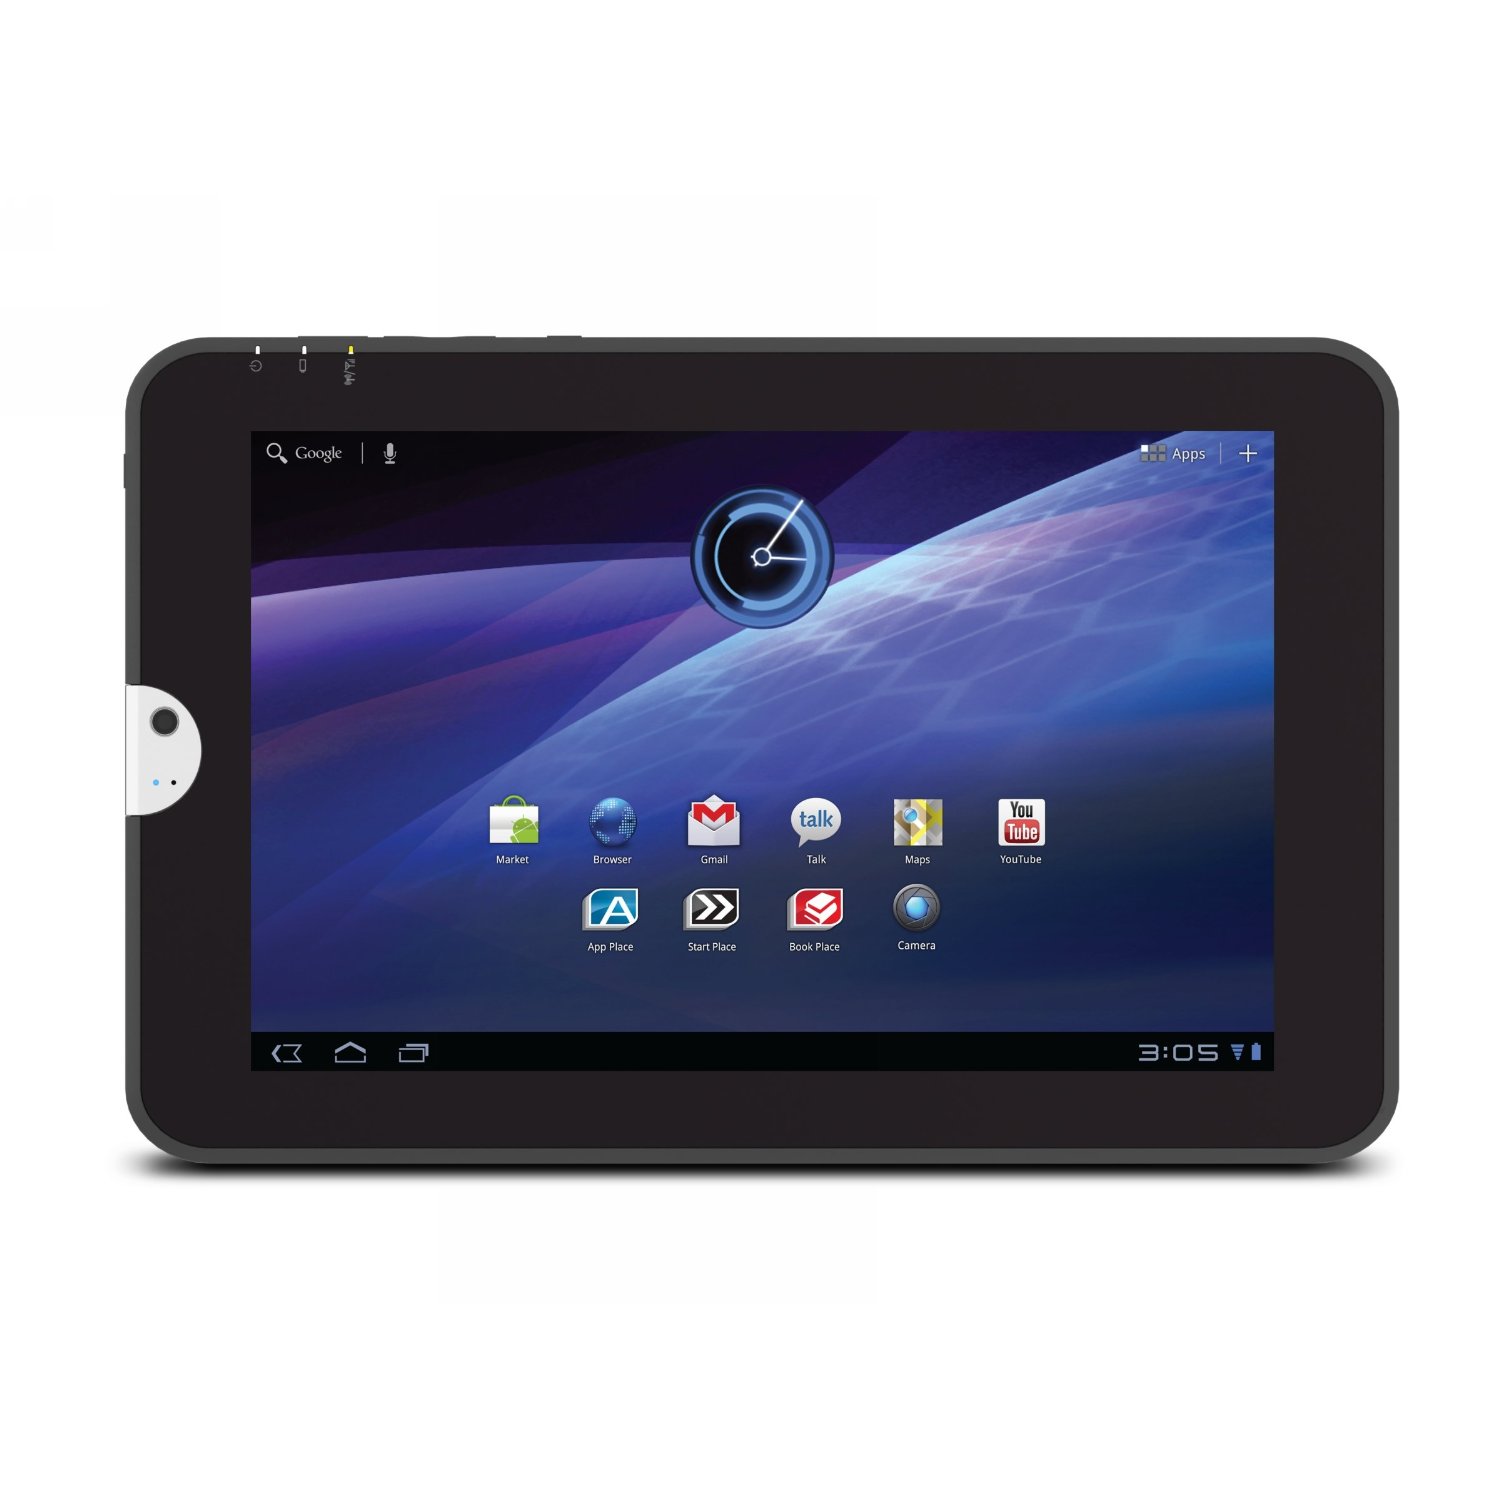 Toshiba Thrive Tablet goes up for Pre-Order on Amazon | iGyaan Network